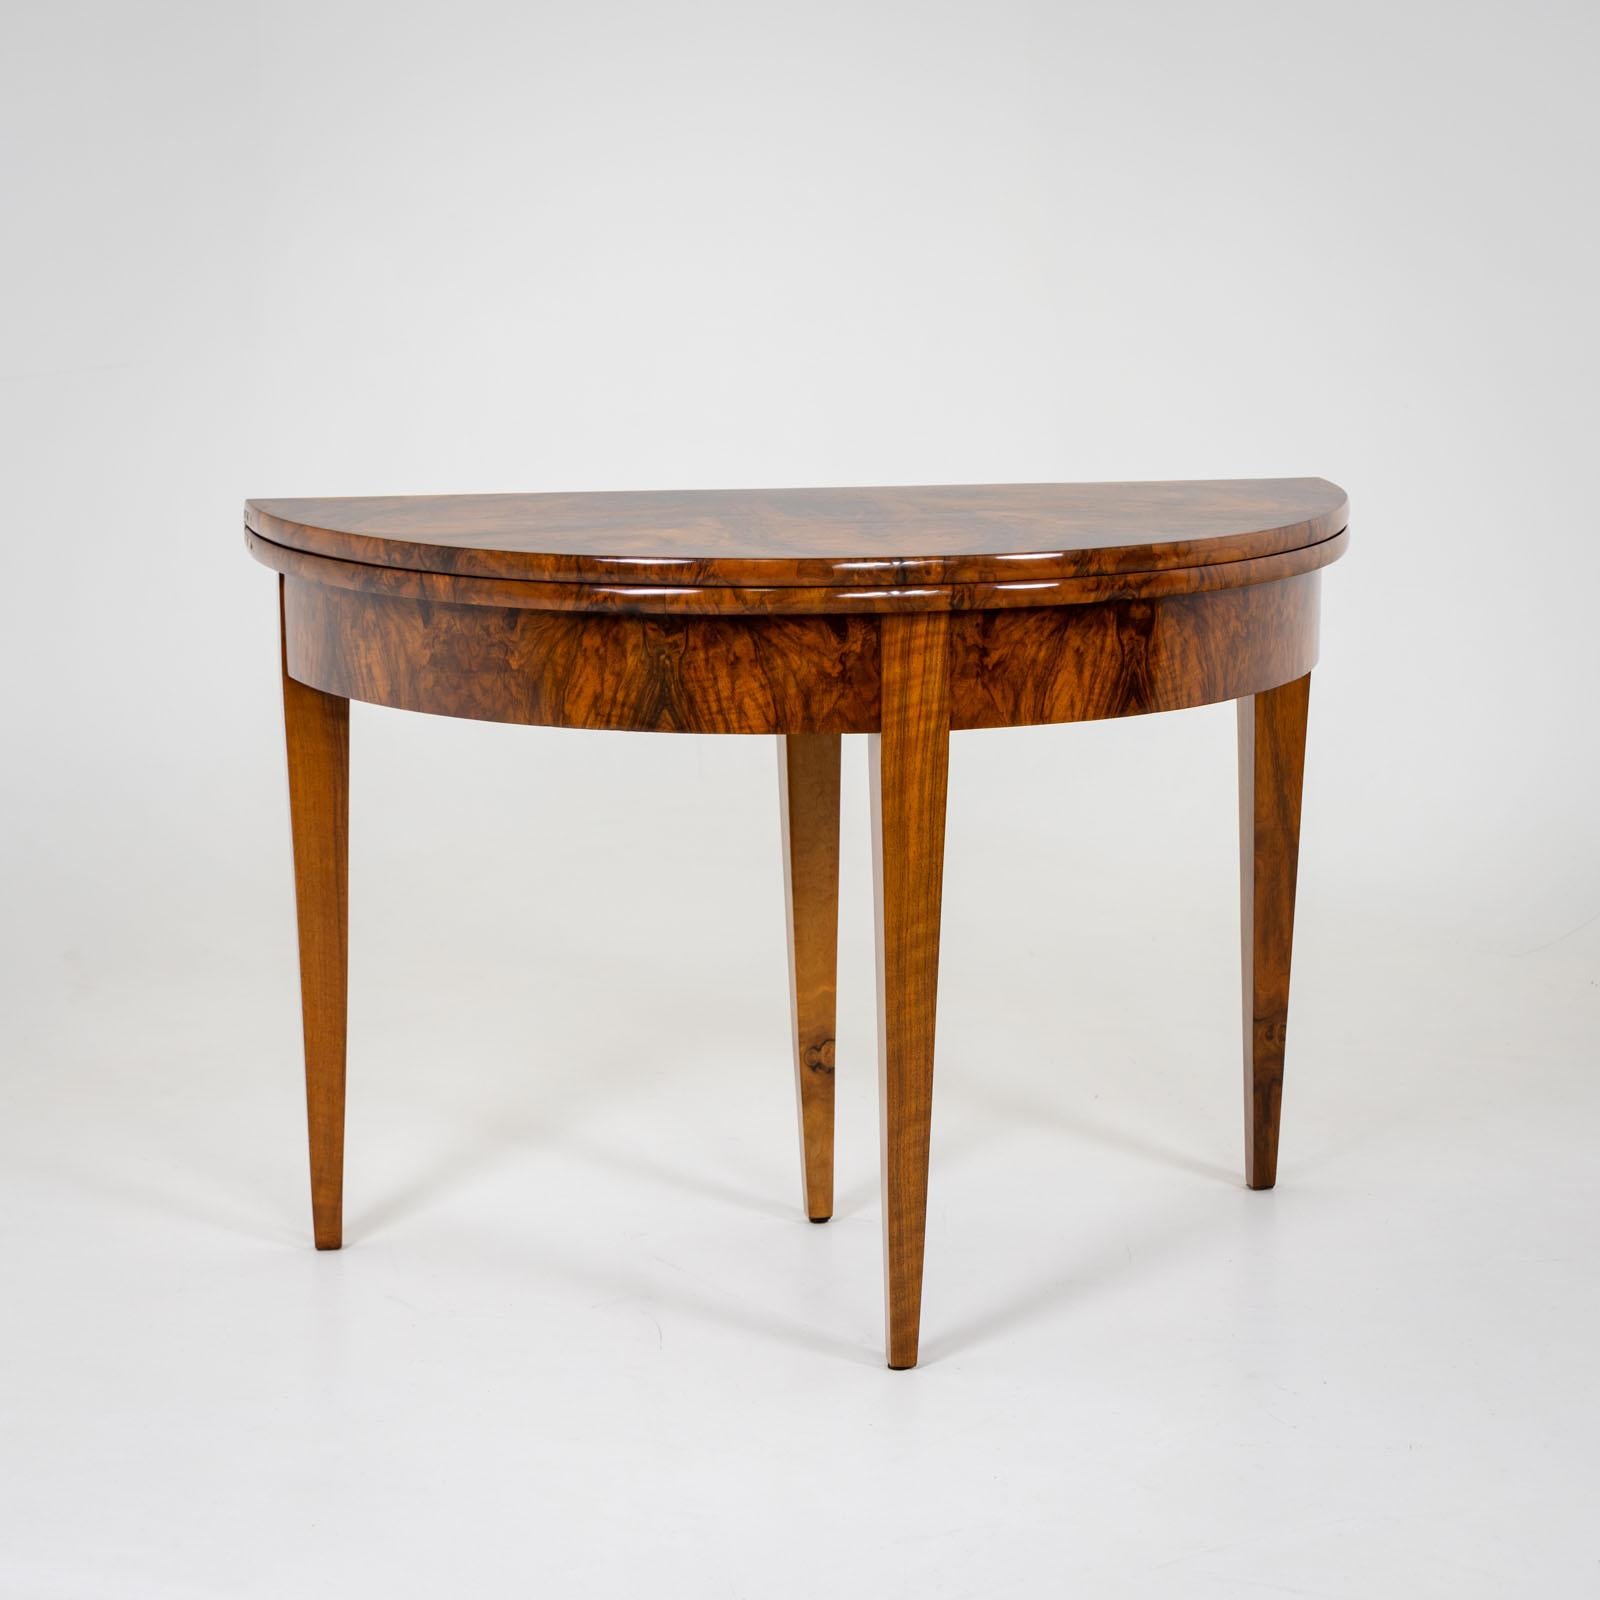 Elegant Demi-Lune console table on high square tapered legs. When opened, the table top rests on the extended rear leg with one drawer. The table is veneered in walnut and polished by hand. The table top is inlaid in a star shape in the center.